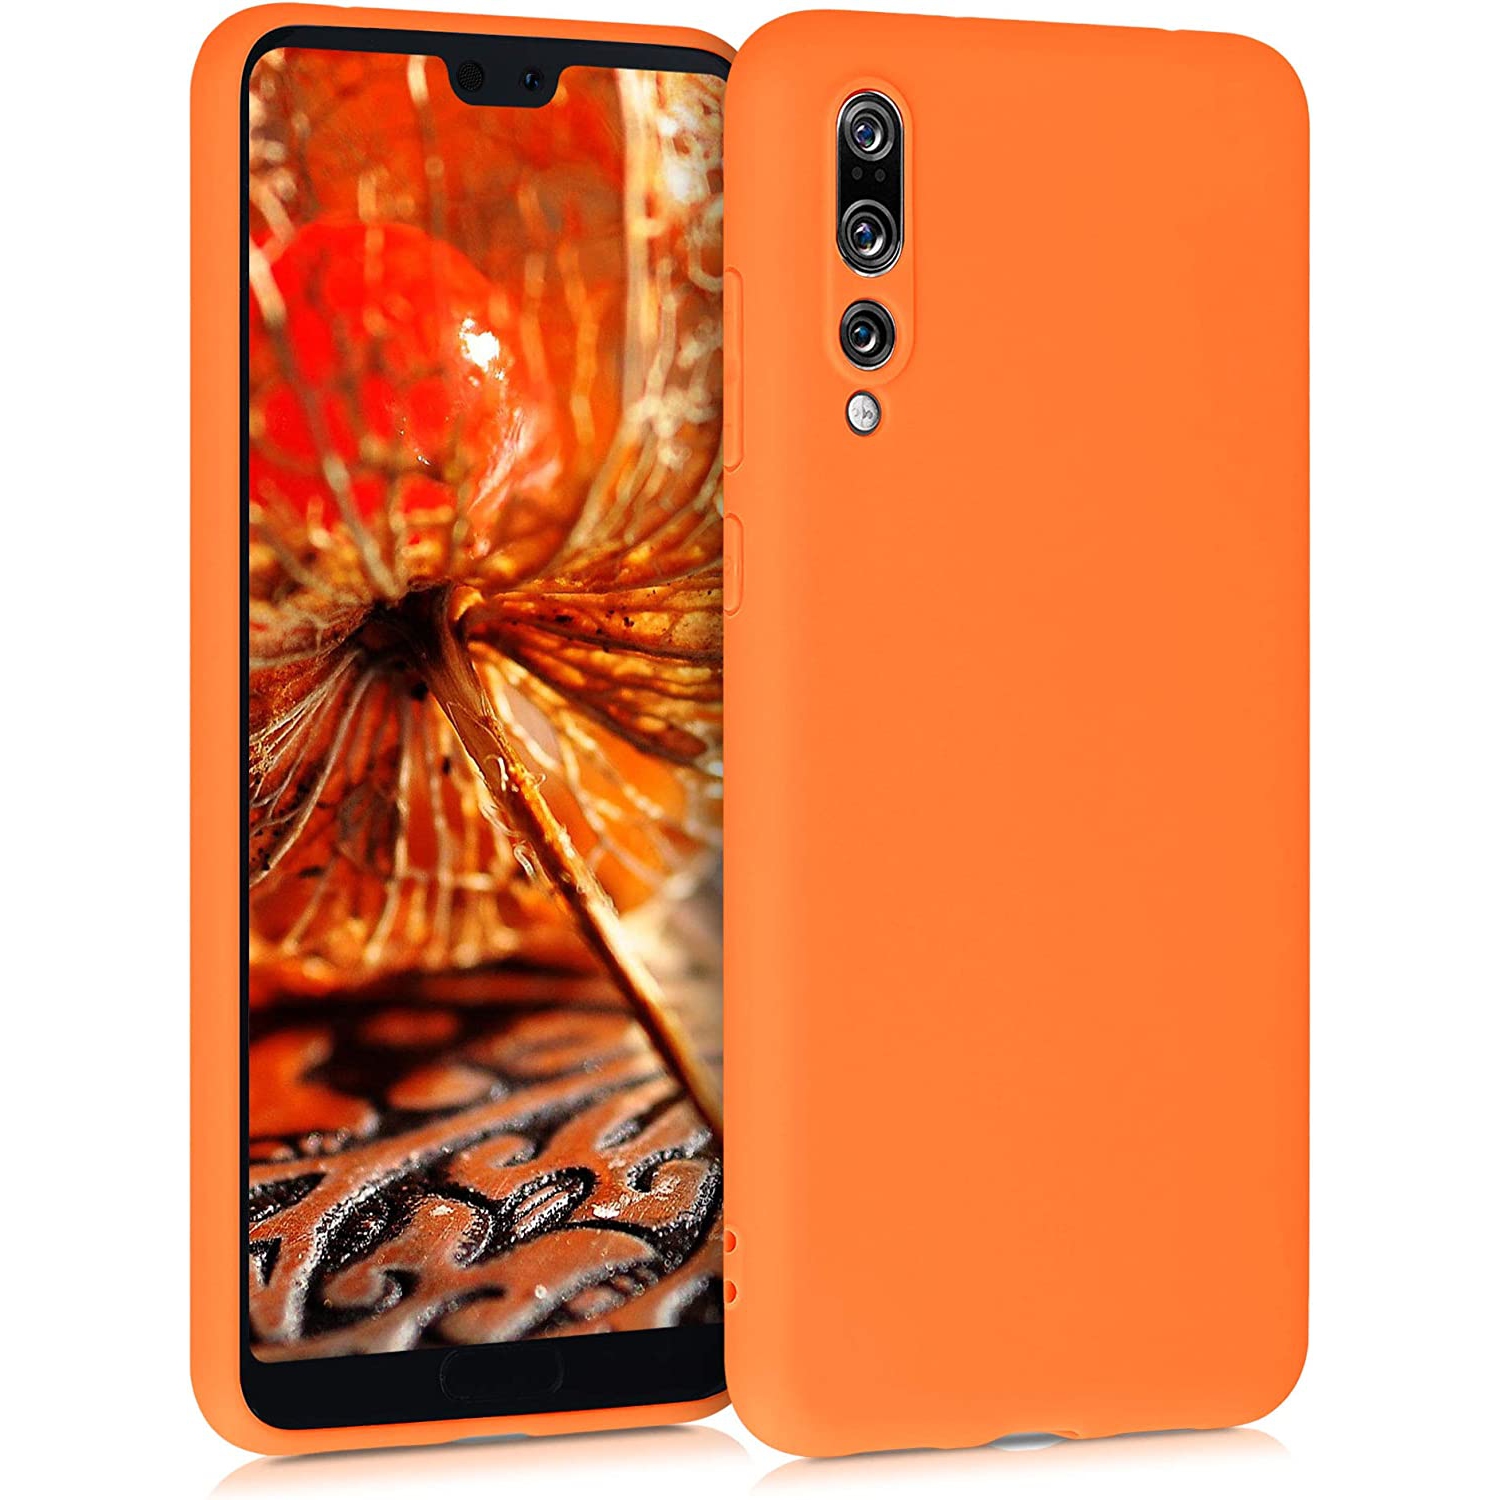 TPU Case Compatible with Huawei P20 Pro - Case Soft Slim Smooth Flexible Protective Phone Cover - Fruity